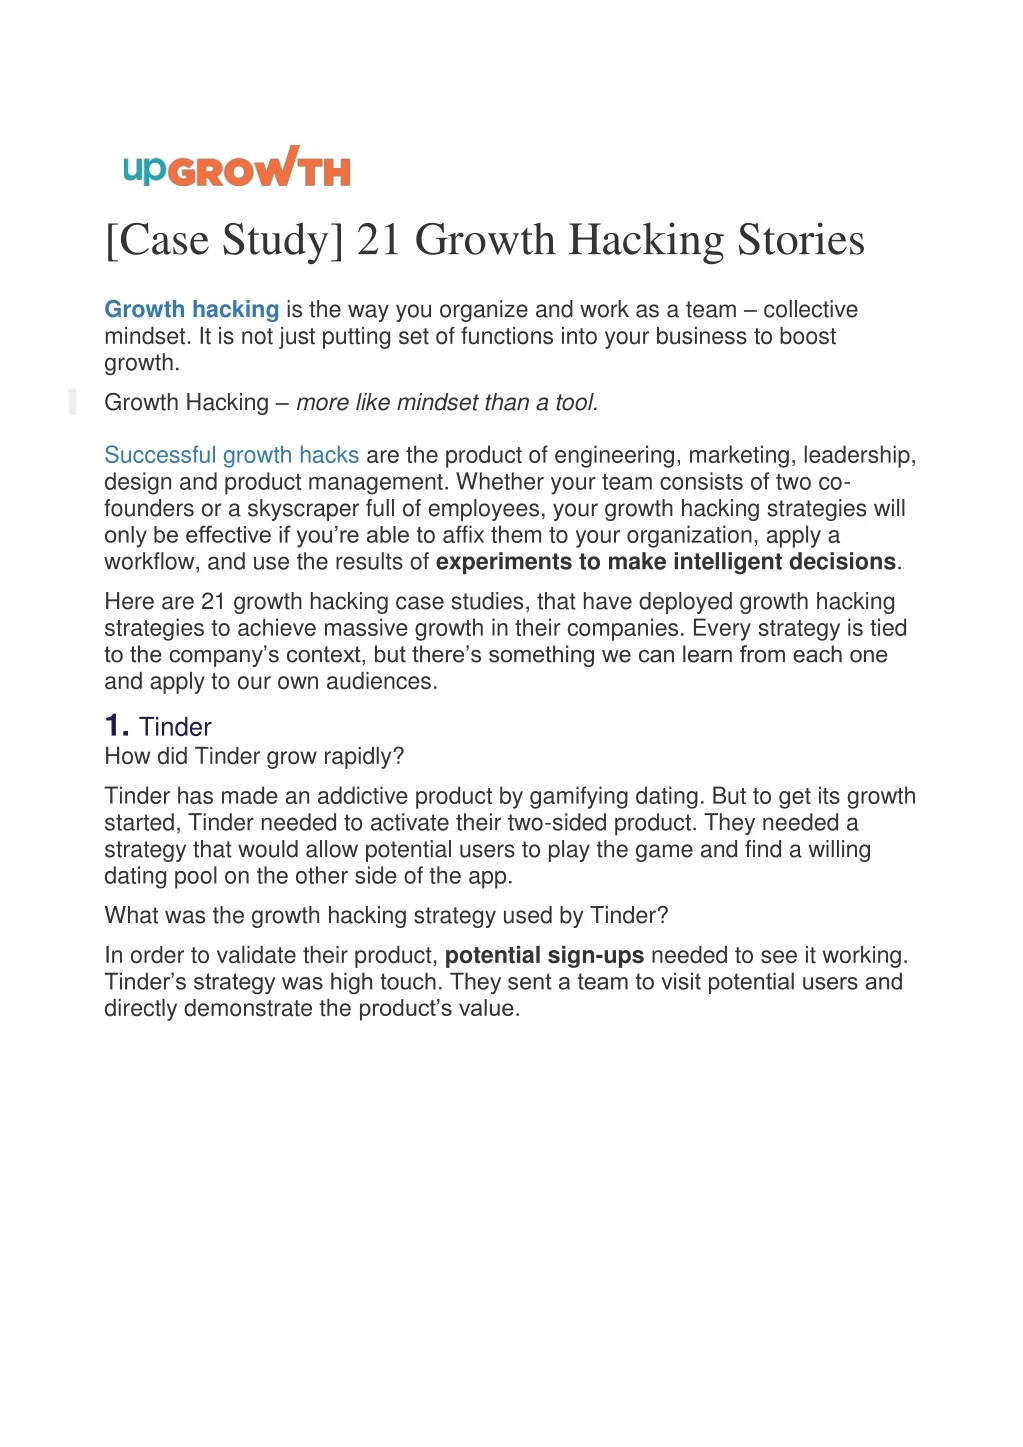 case study 21 growth hacking stories